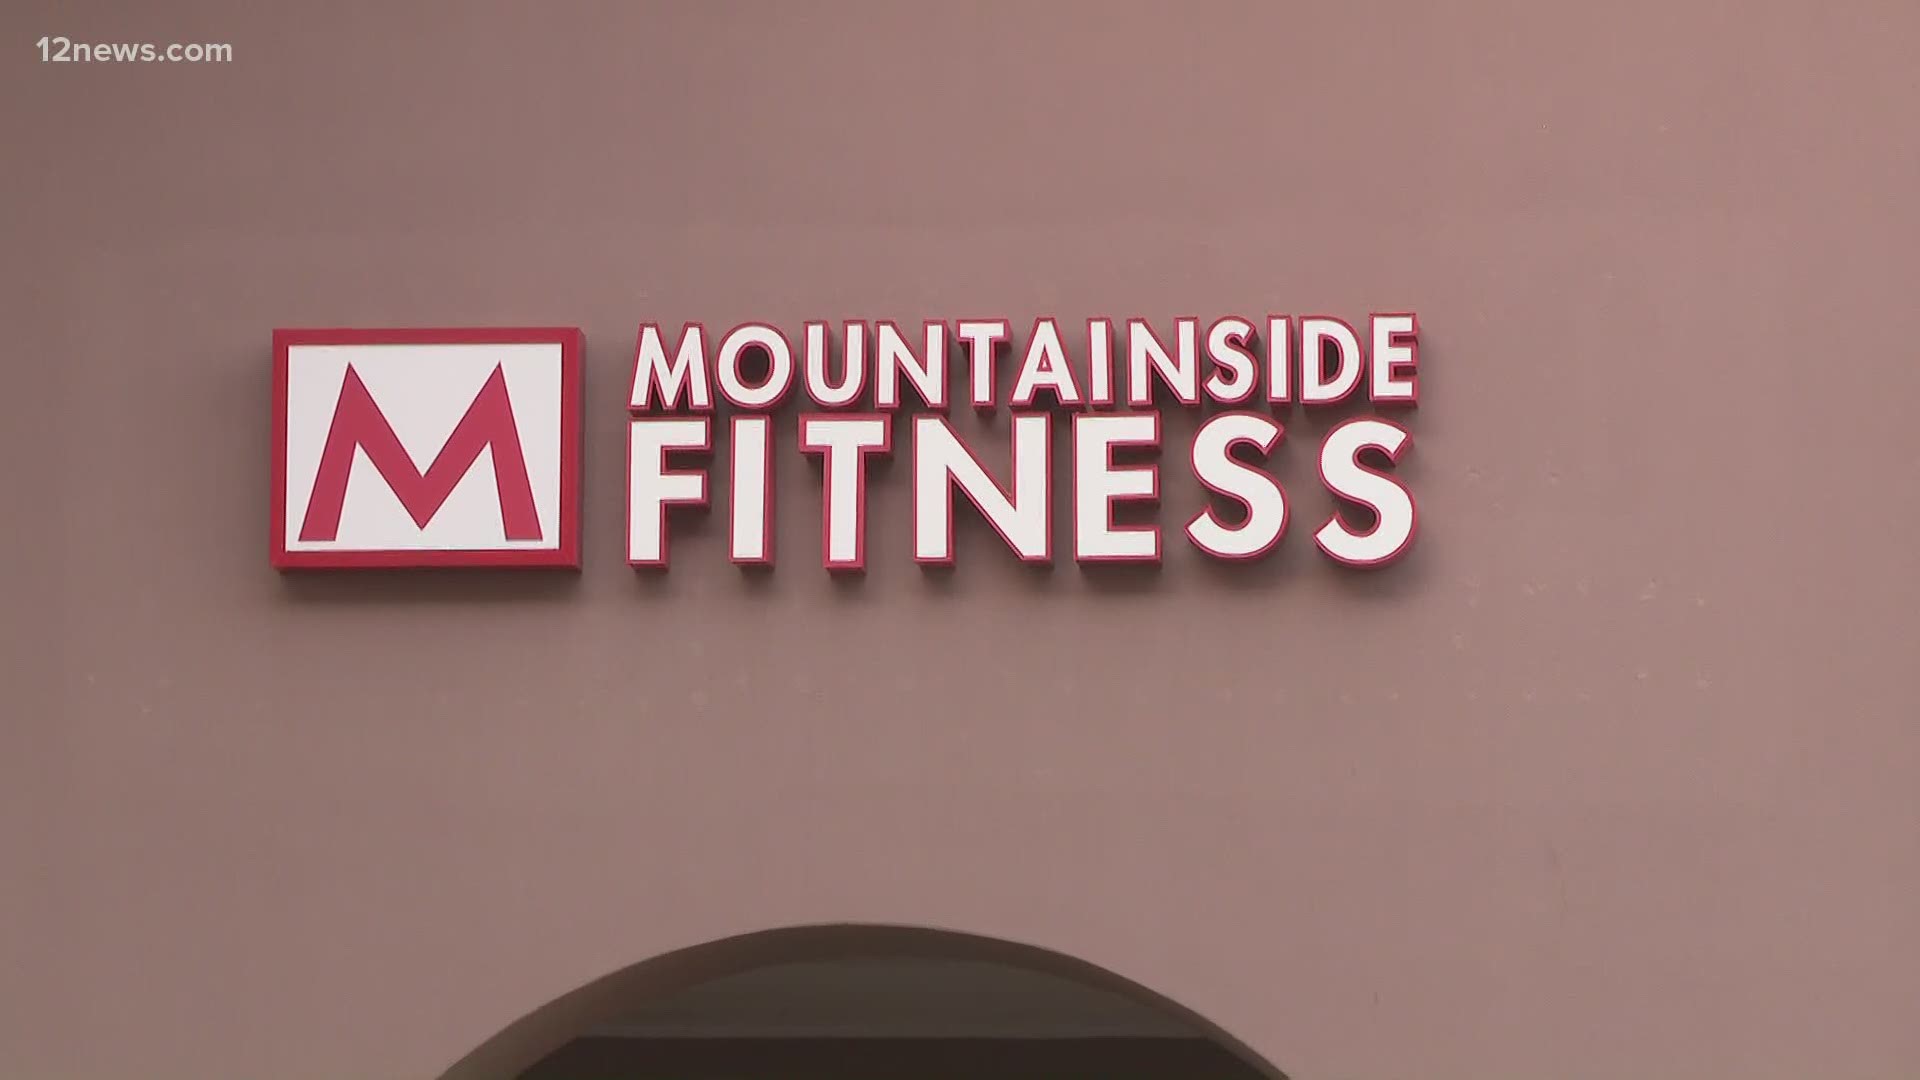 Mountainside Fitness is defying the governor's executive order to close. The gym says they're suing while getting fined by multiple agencies.